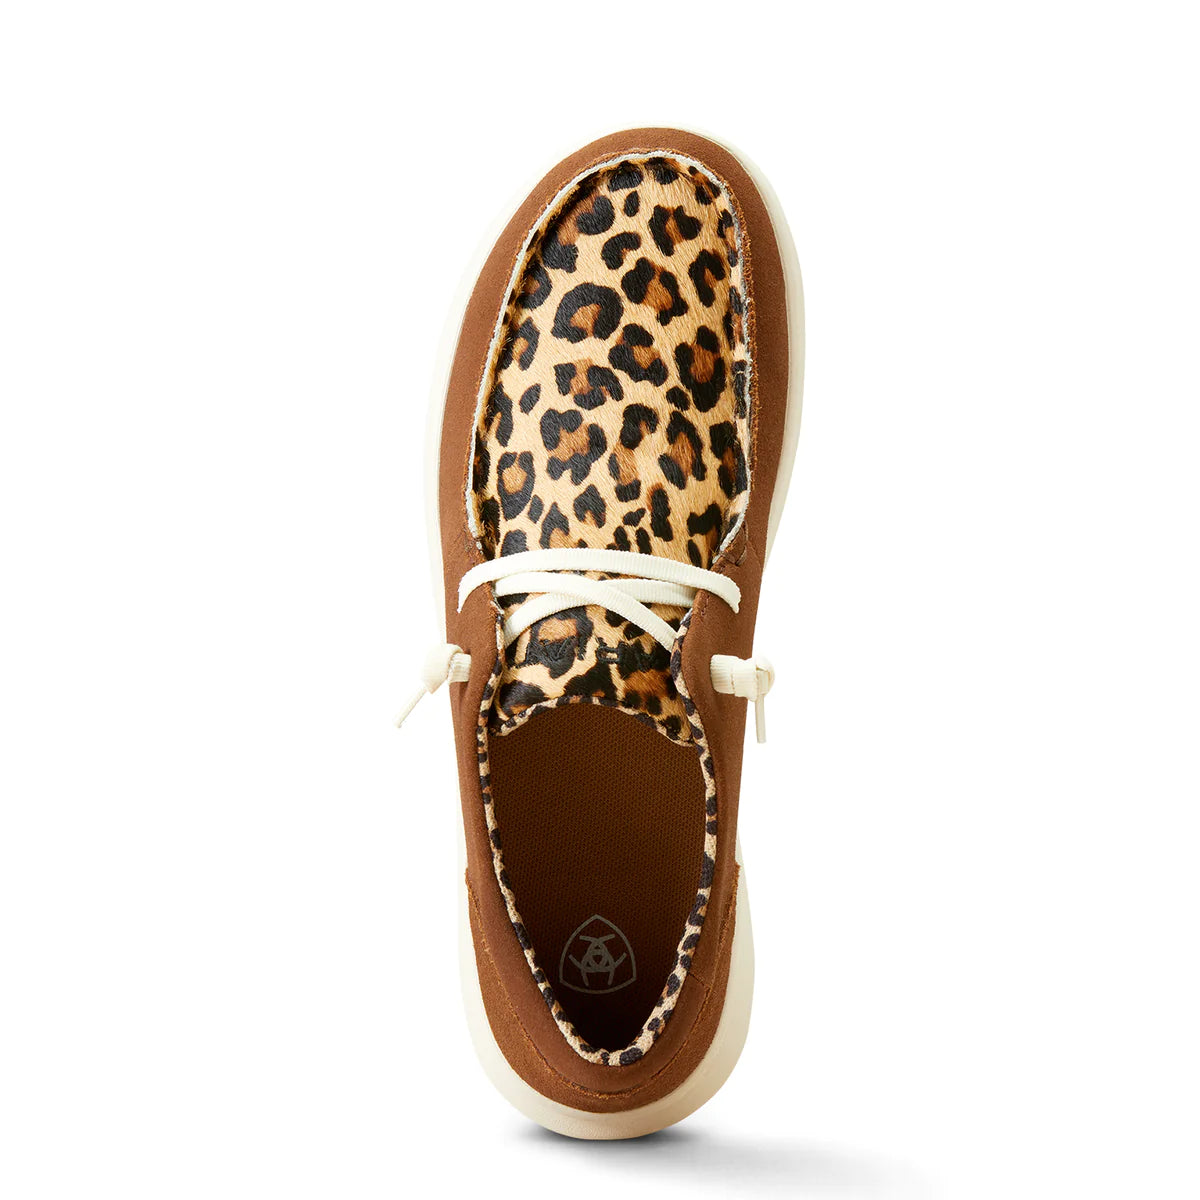 Ariat Women's Hilo Ginger Spice/Leopard Hair on